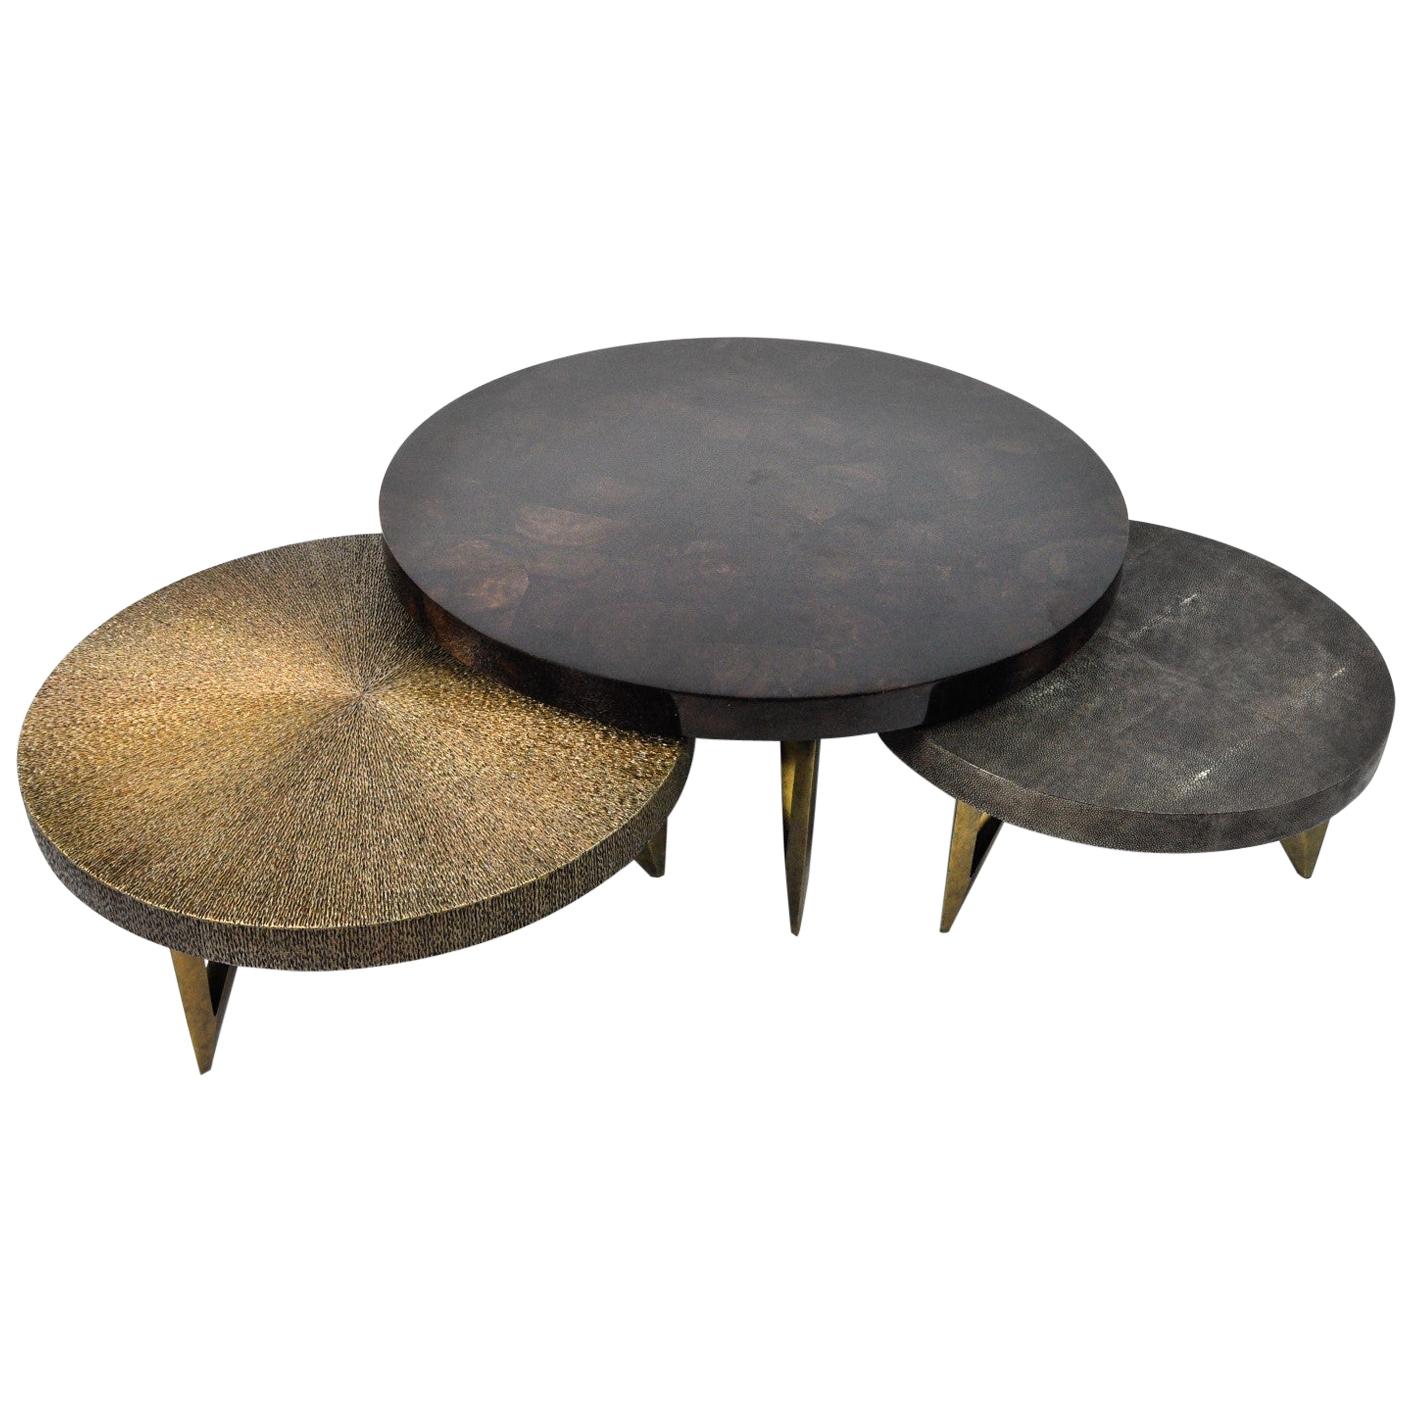 The set of 3 coffee tables Reef is made of various inlaid materials.
These modular tables can be setted up following your wishes.
The center piece is covered with a polished brown shell while the side tables are inlaid with a dark grey shagreen